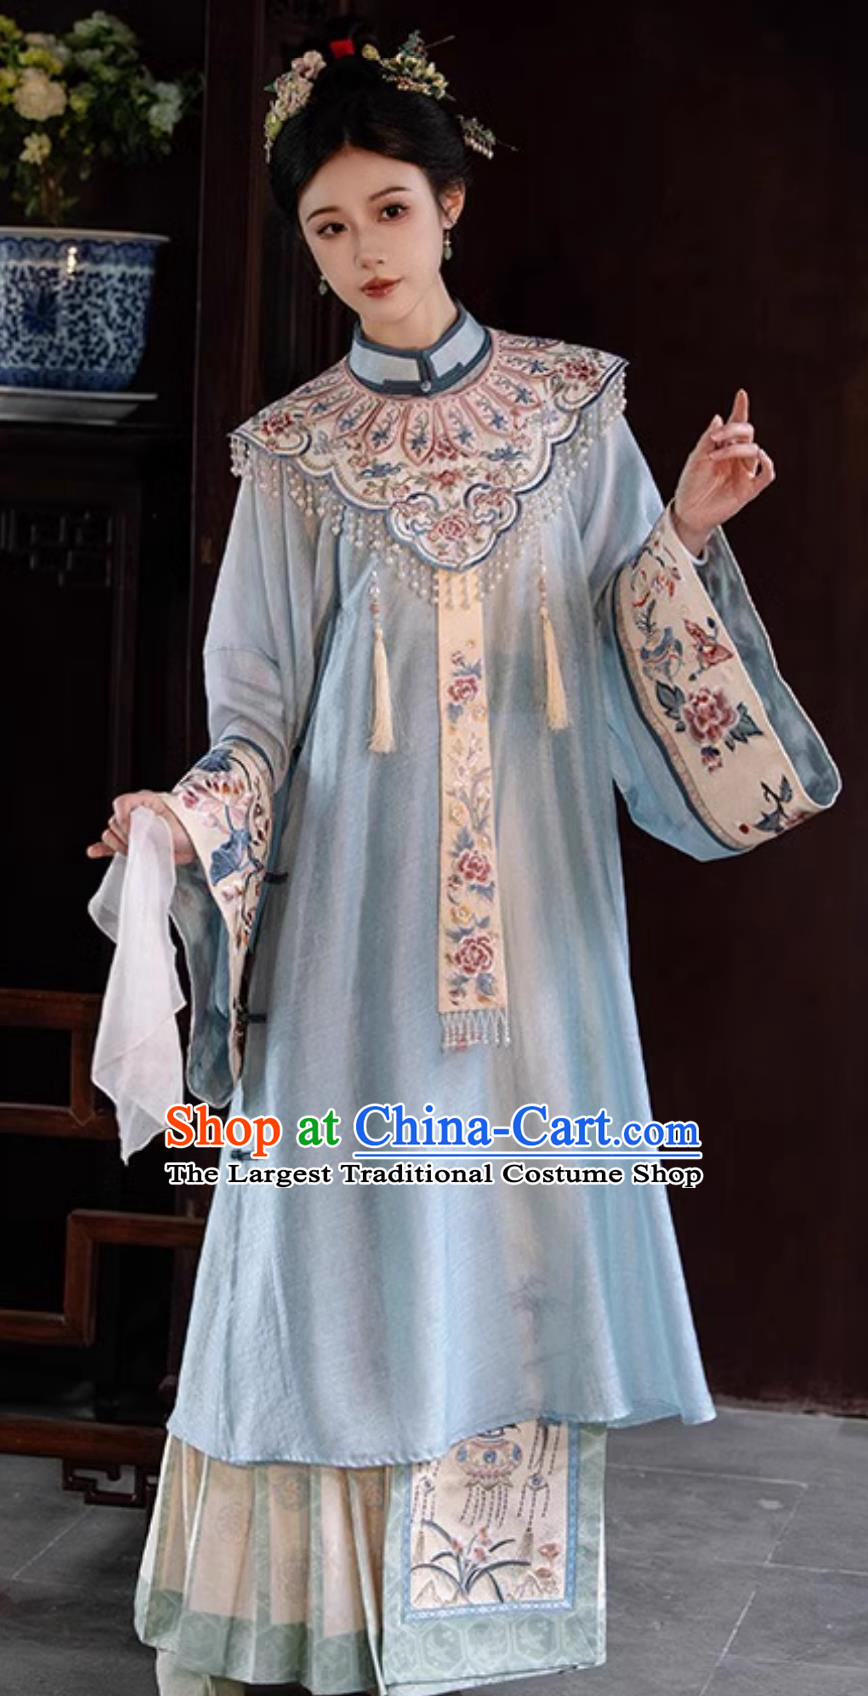 China Qing Dynasty Court Woman Costume Ancient Chinese Clothing Embroidered Yunjian Long Gown and Mamian Skirt Complete Set